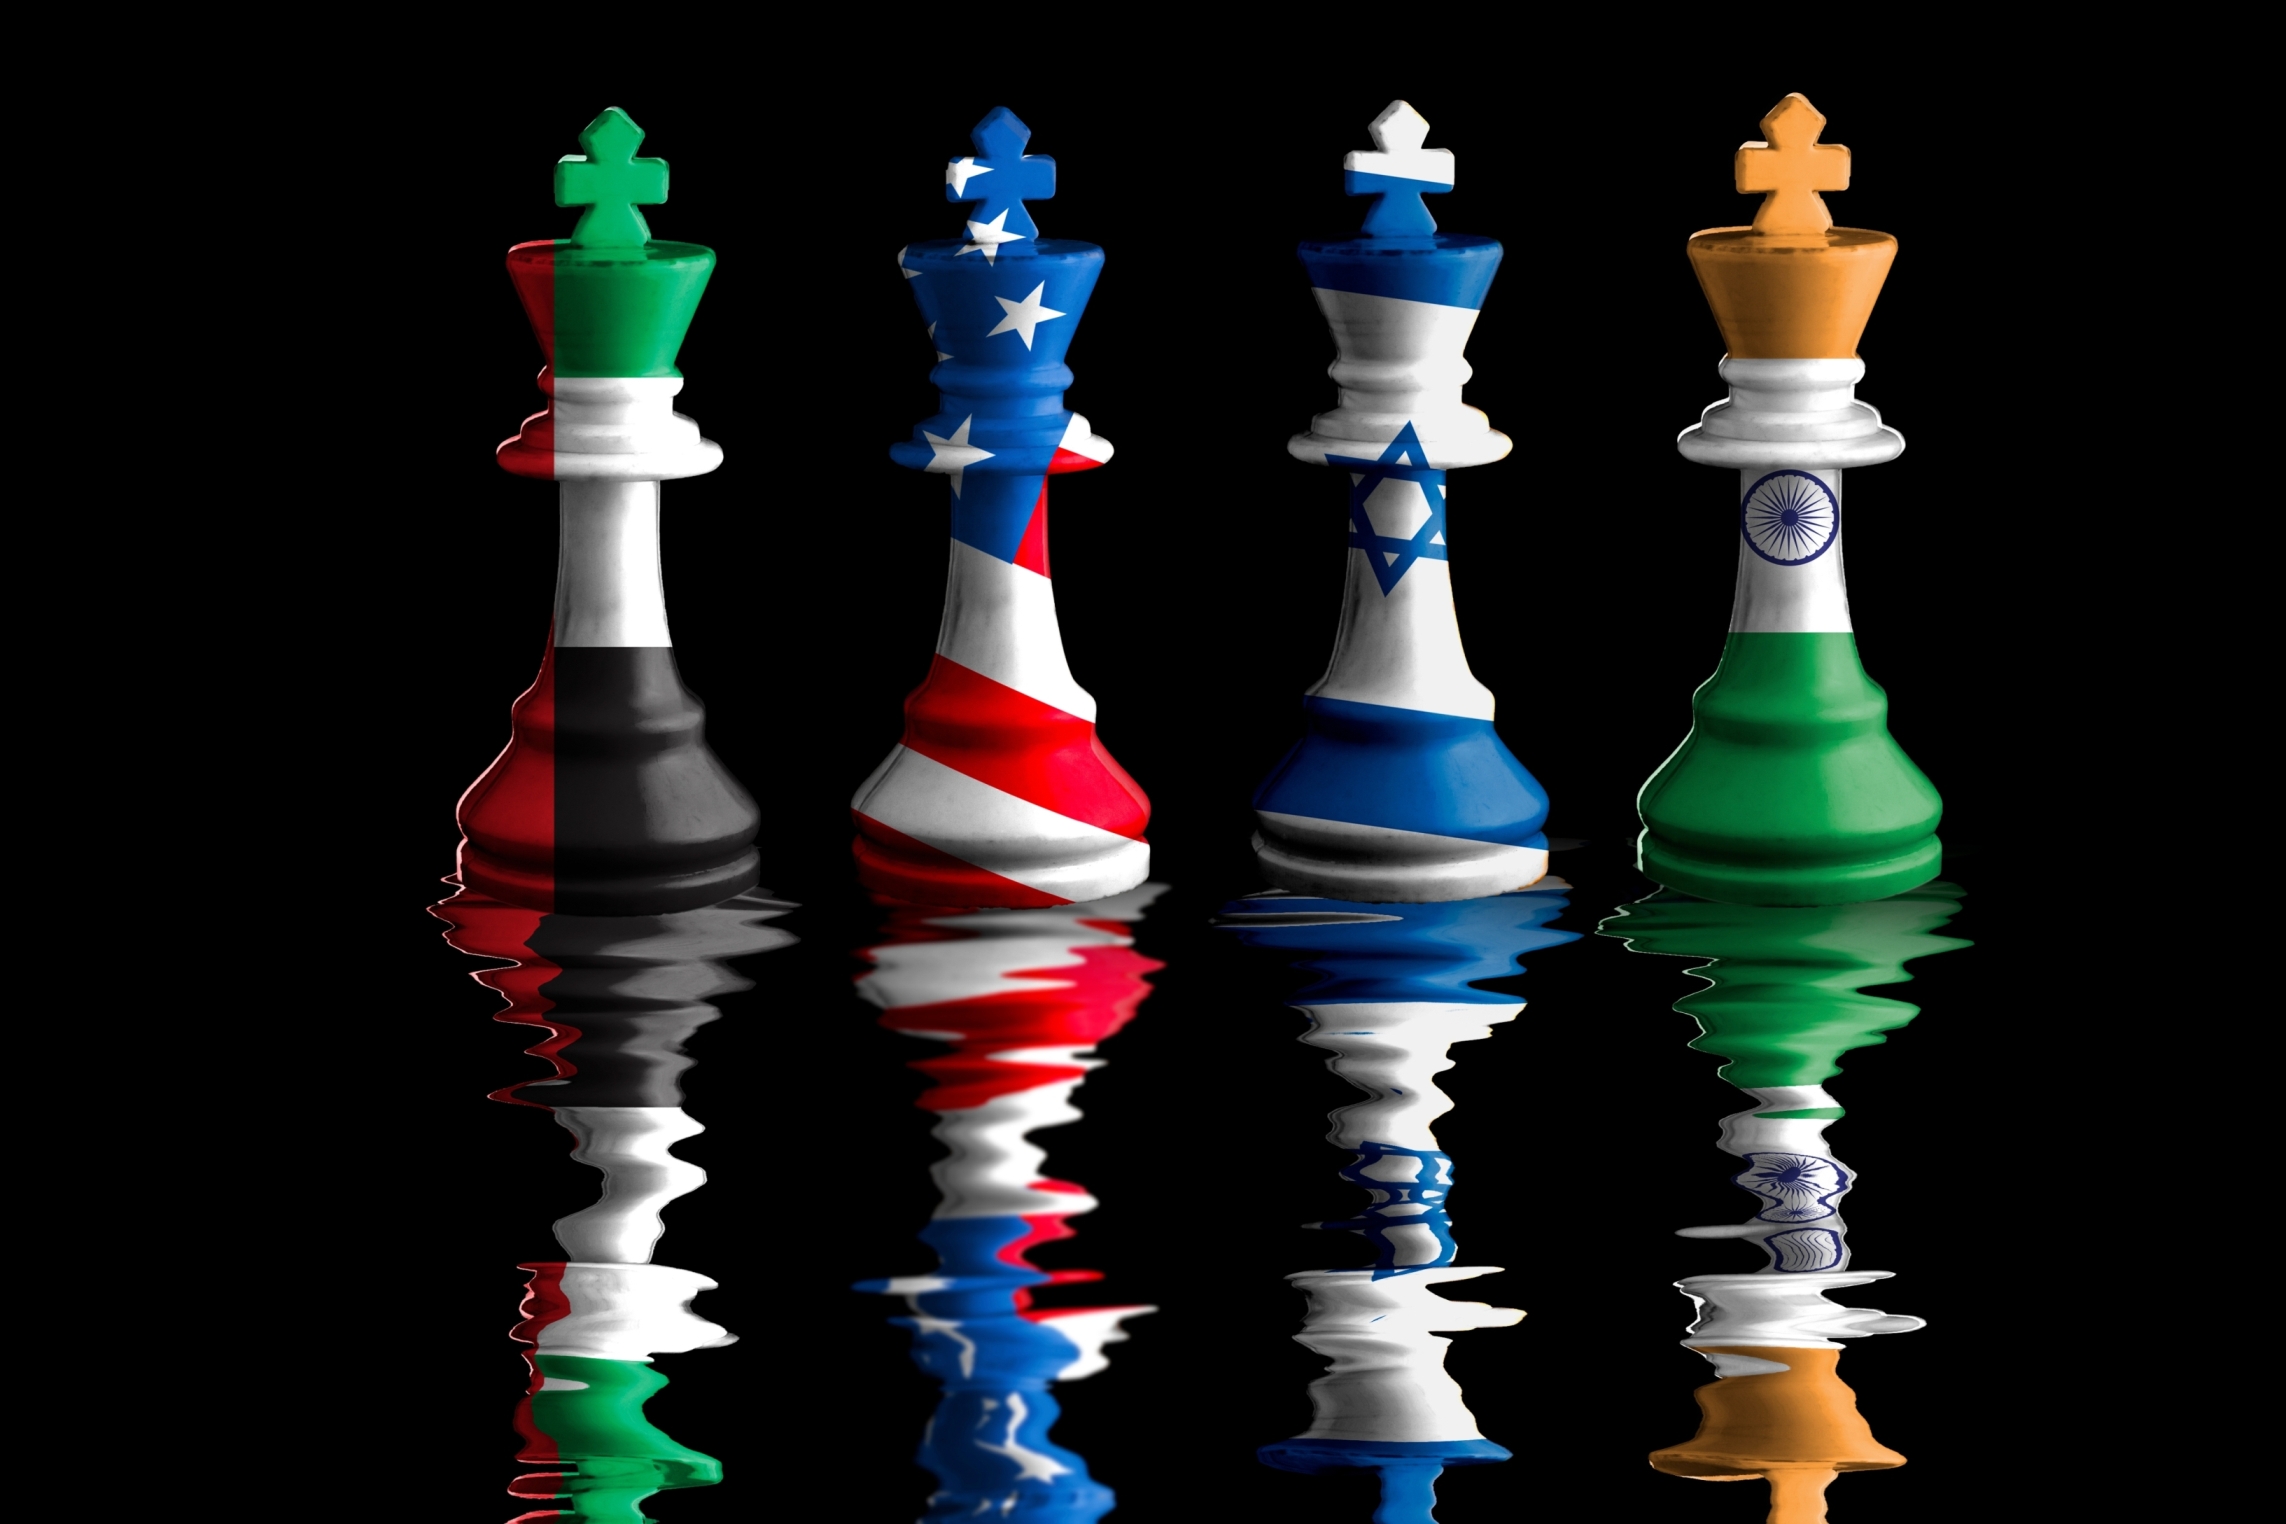 Chess Figures with the Flags of UAE, USA, Israel and India